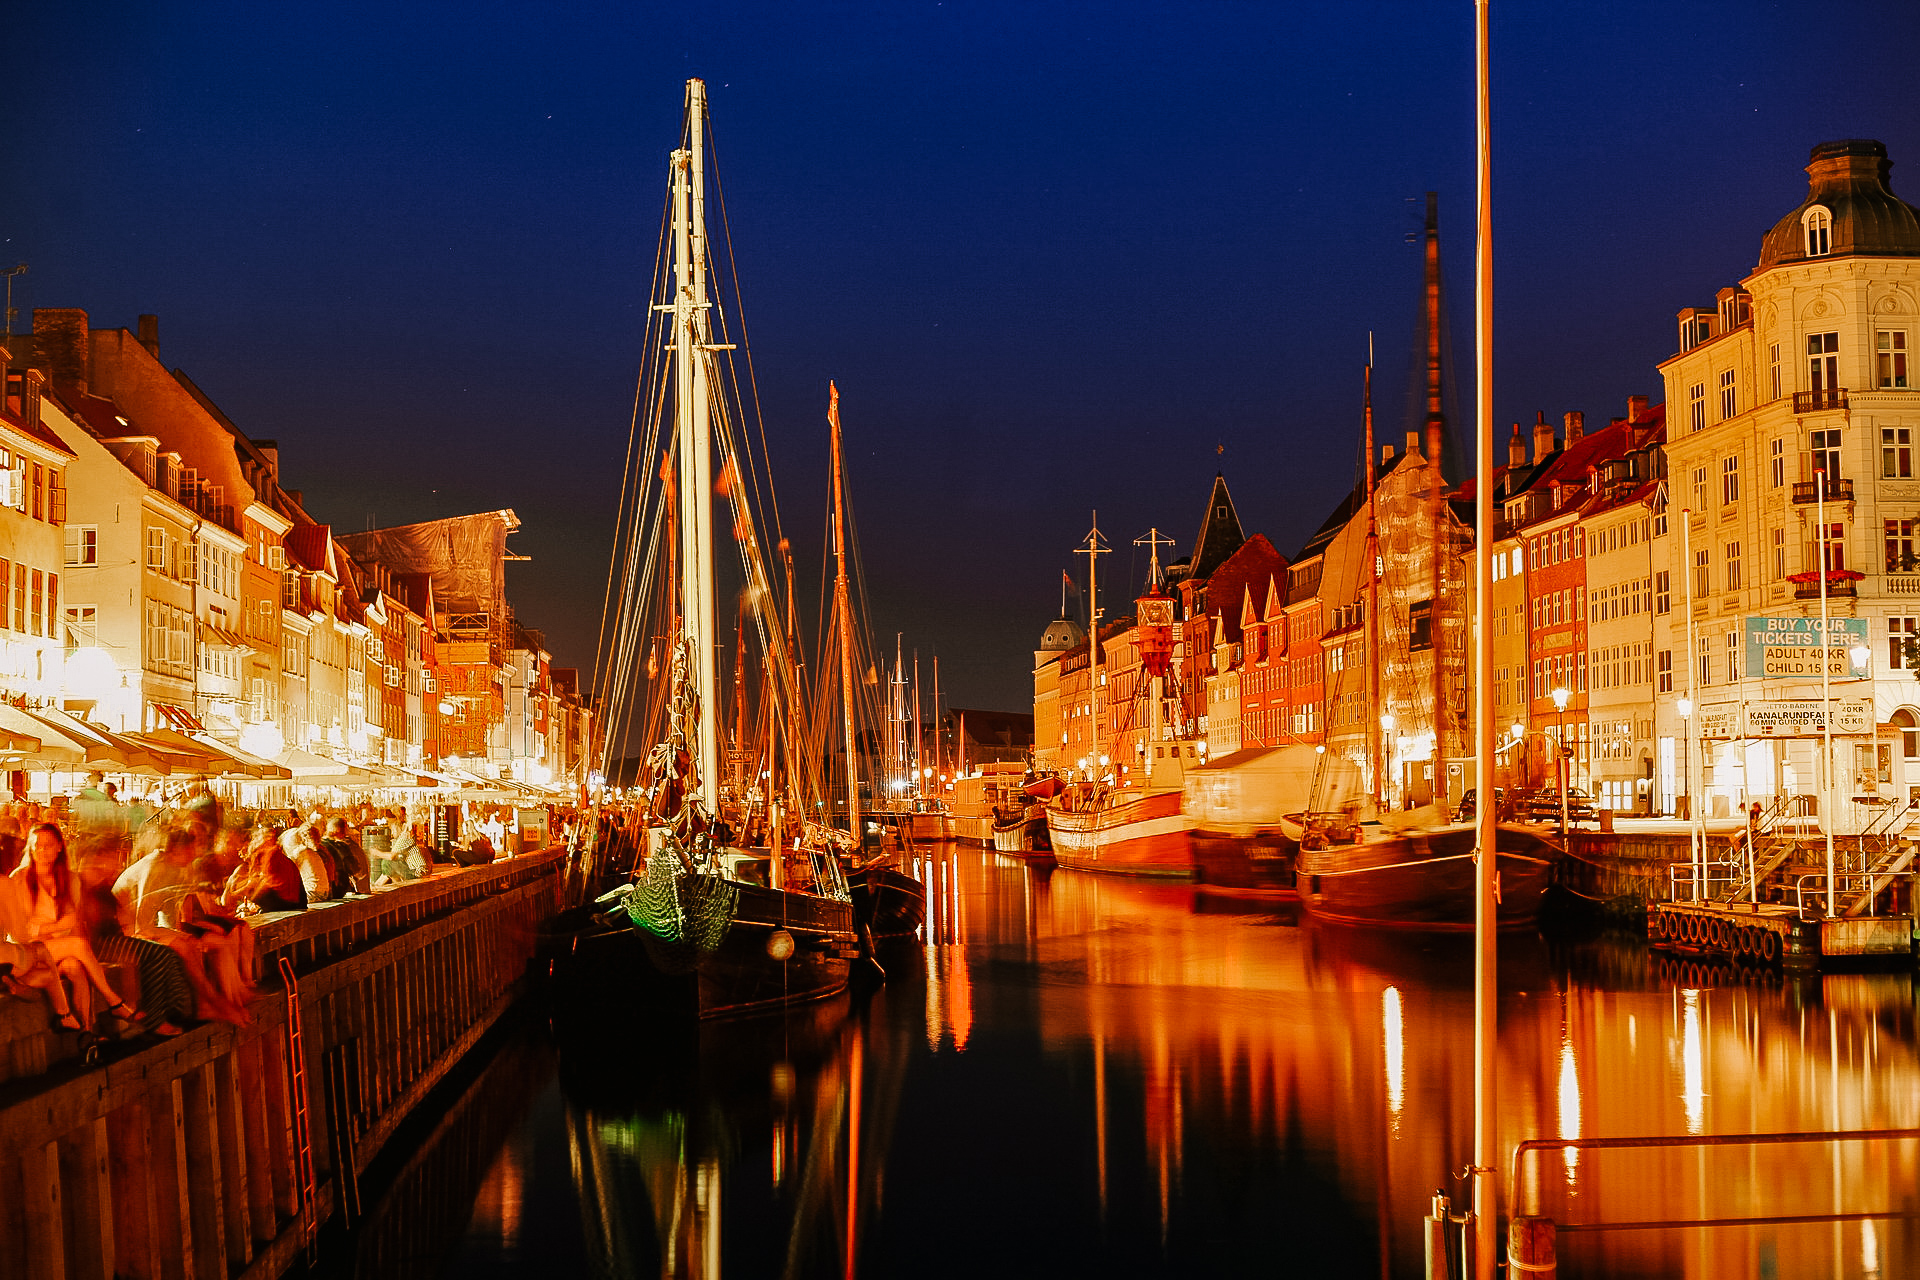 A pictre of Nyhavn canal in Copenhagen at night, with pictures of boats and well lit up restaurants lining the sides.